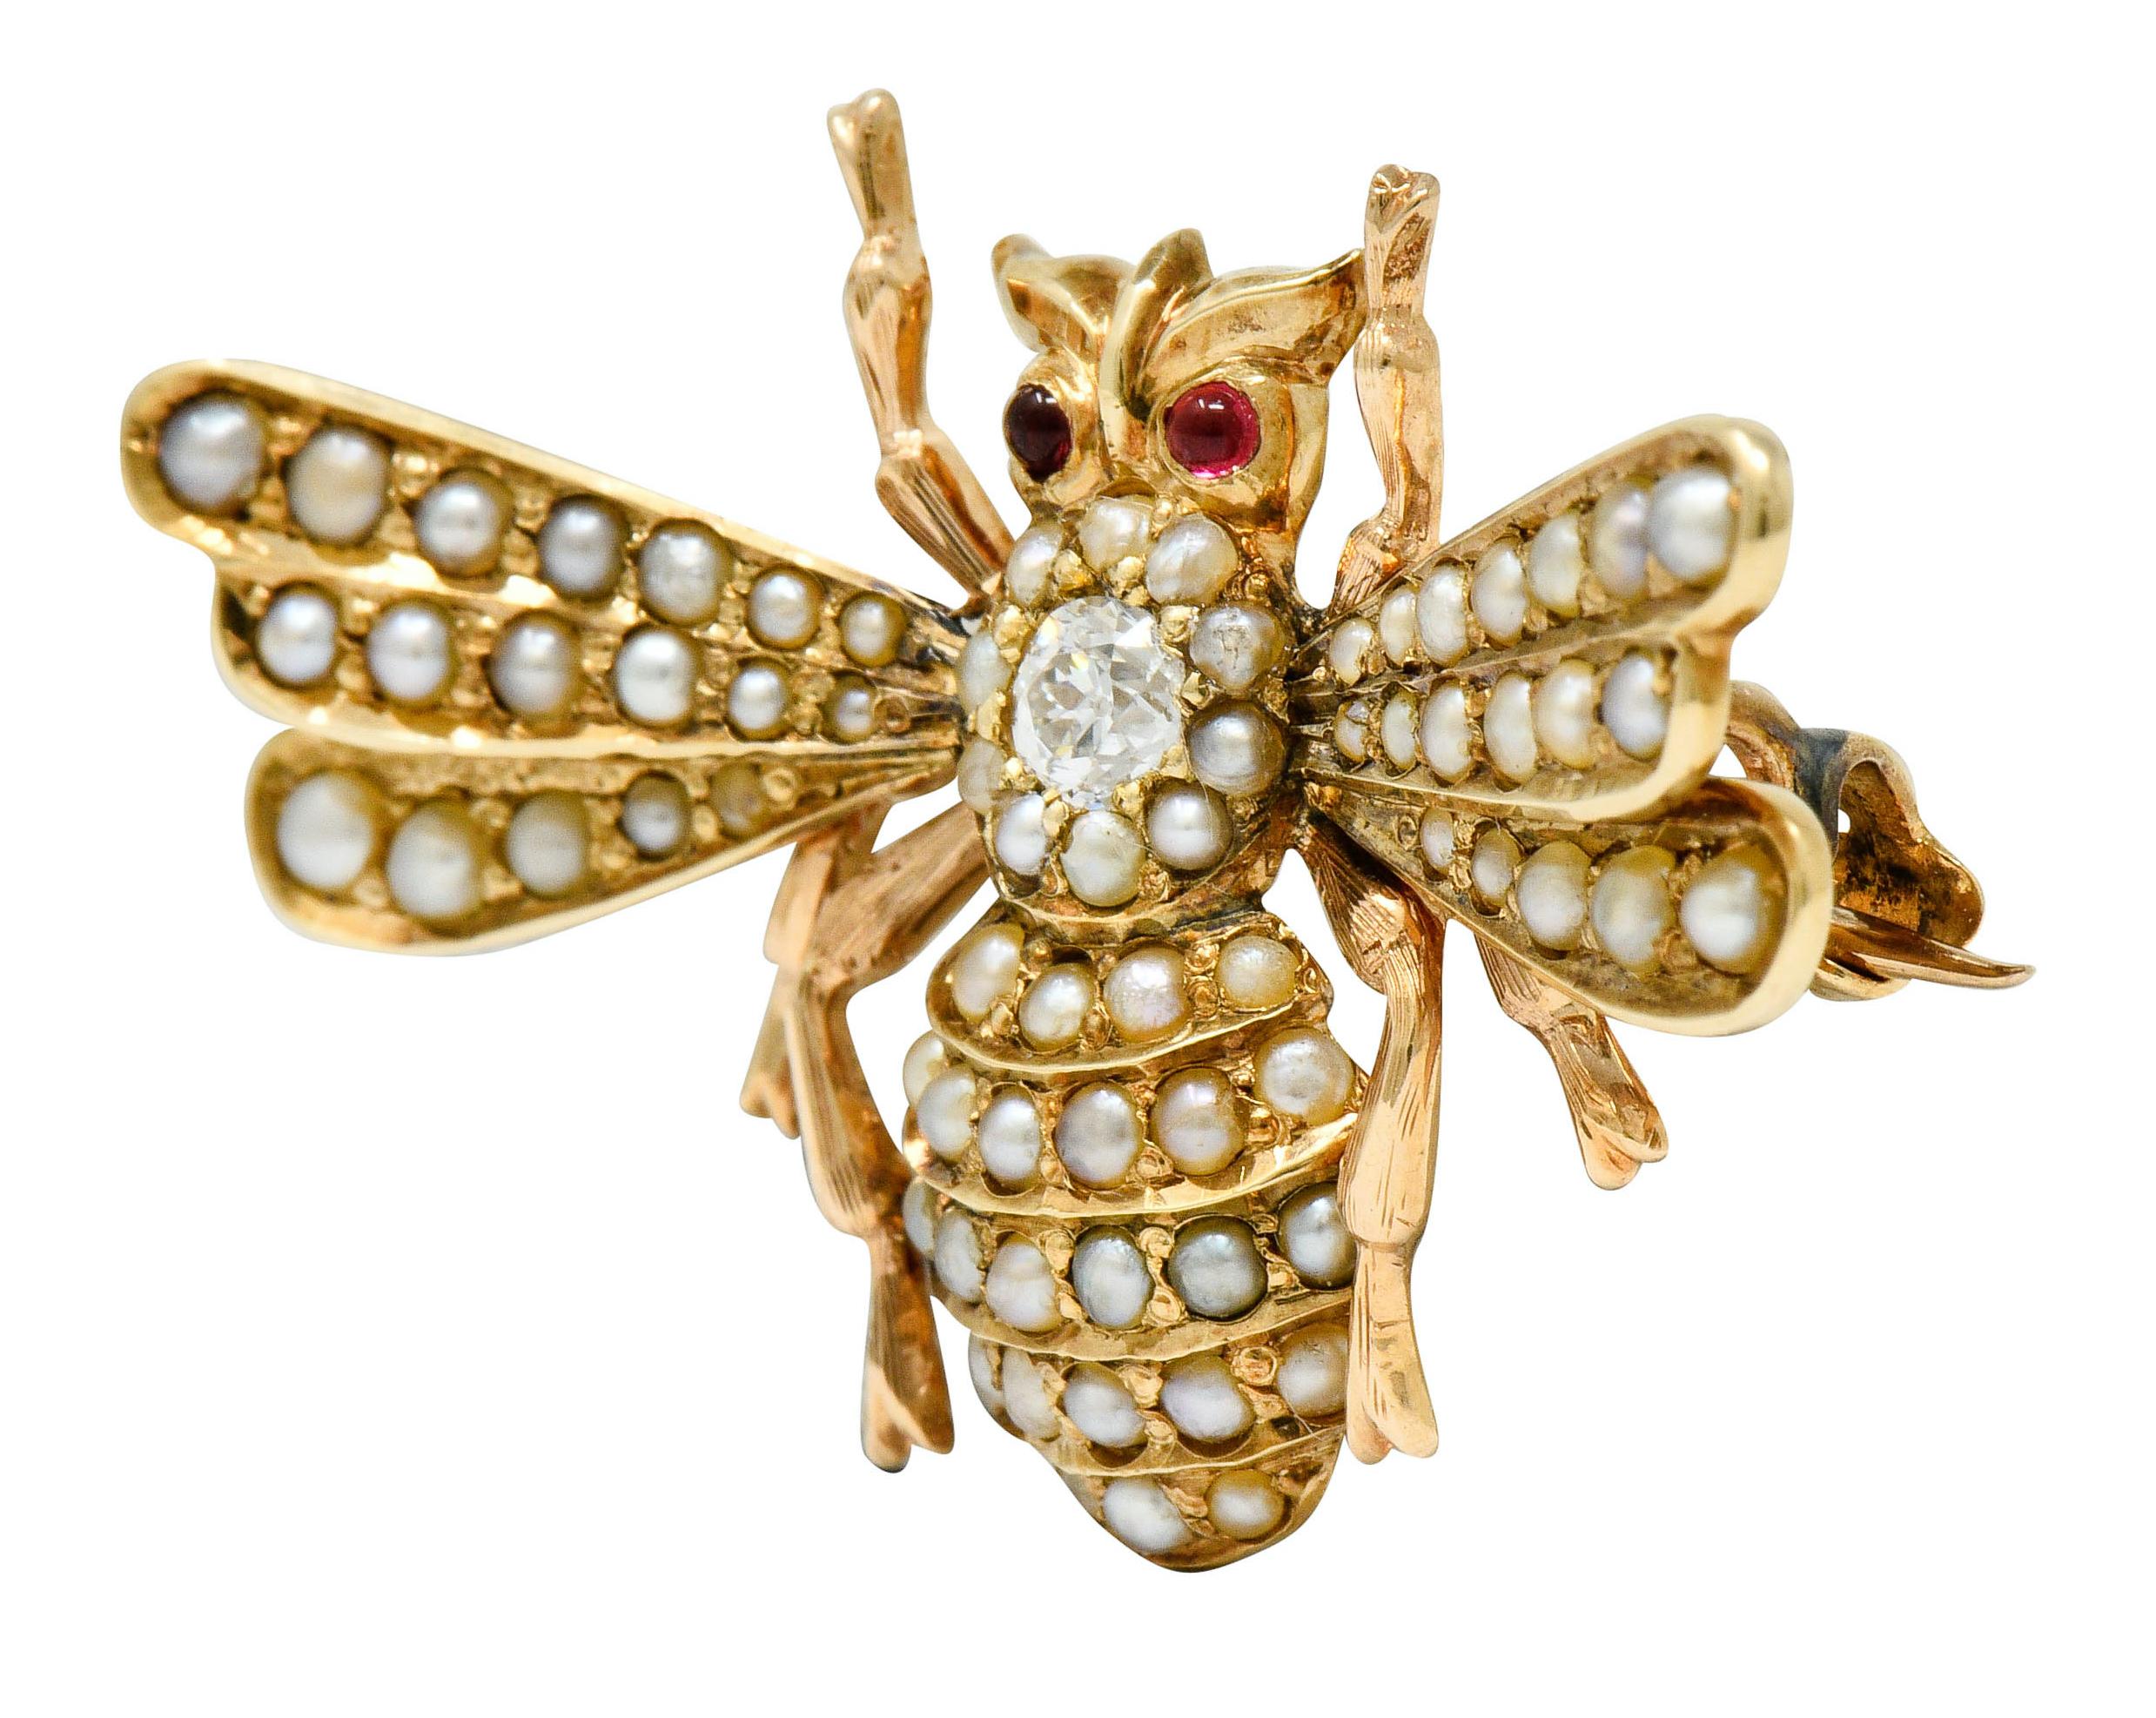 Brooch is designed as winged bee-like insect with adorable polished gold appendages and accented by ruby cabochon eyes

Centering a bead set old European cut diamond weighing approximately 0.18 carat, G color with SI clarity

Set throughout by rows